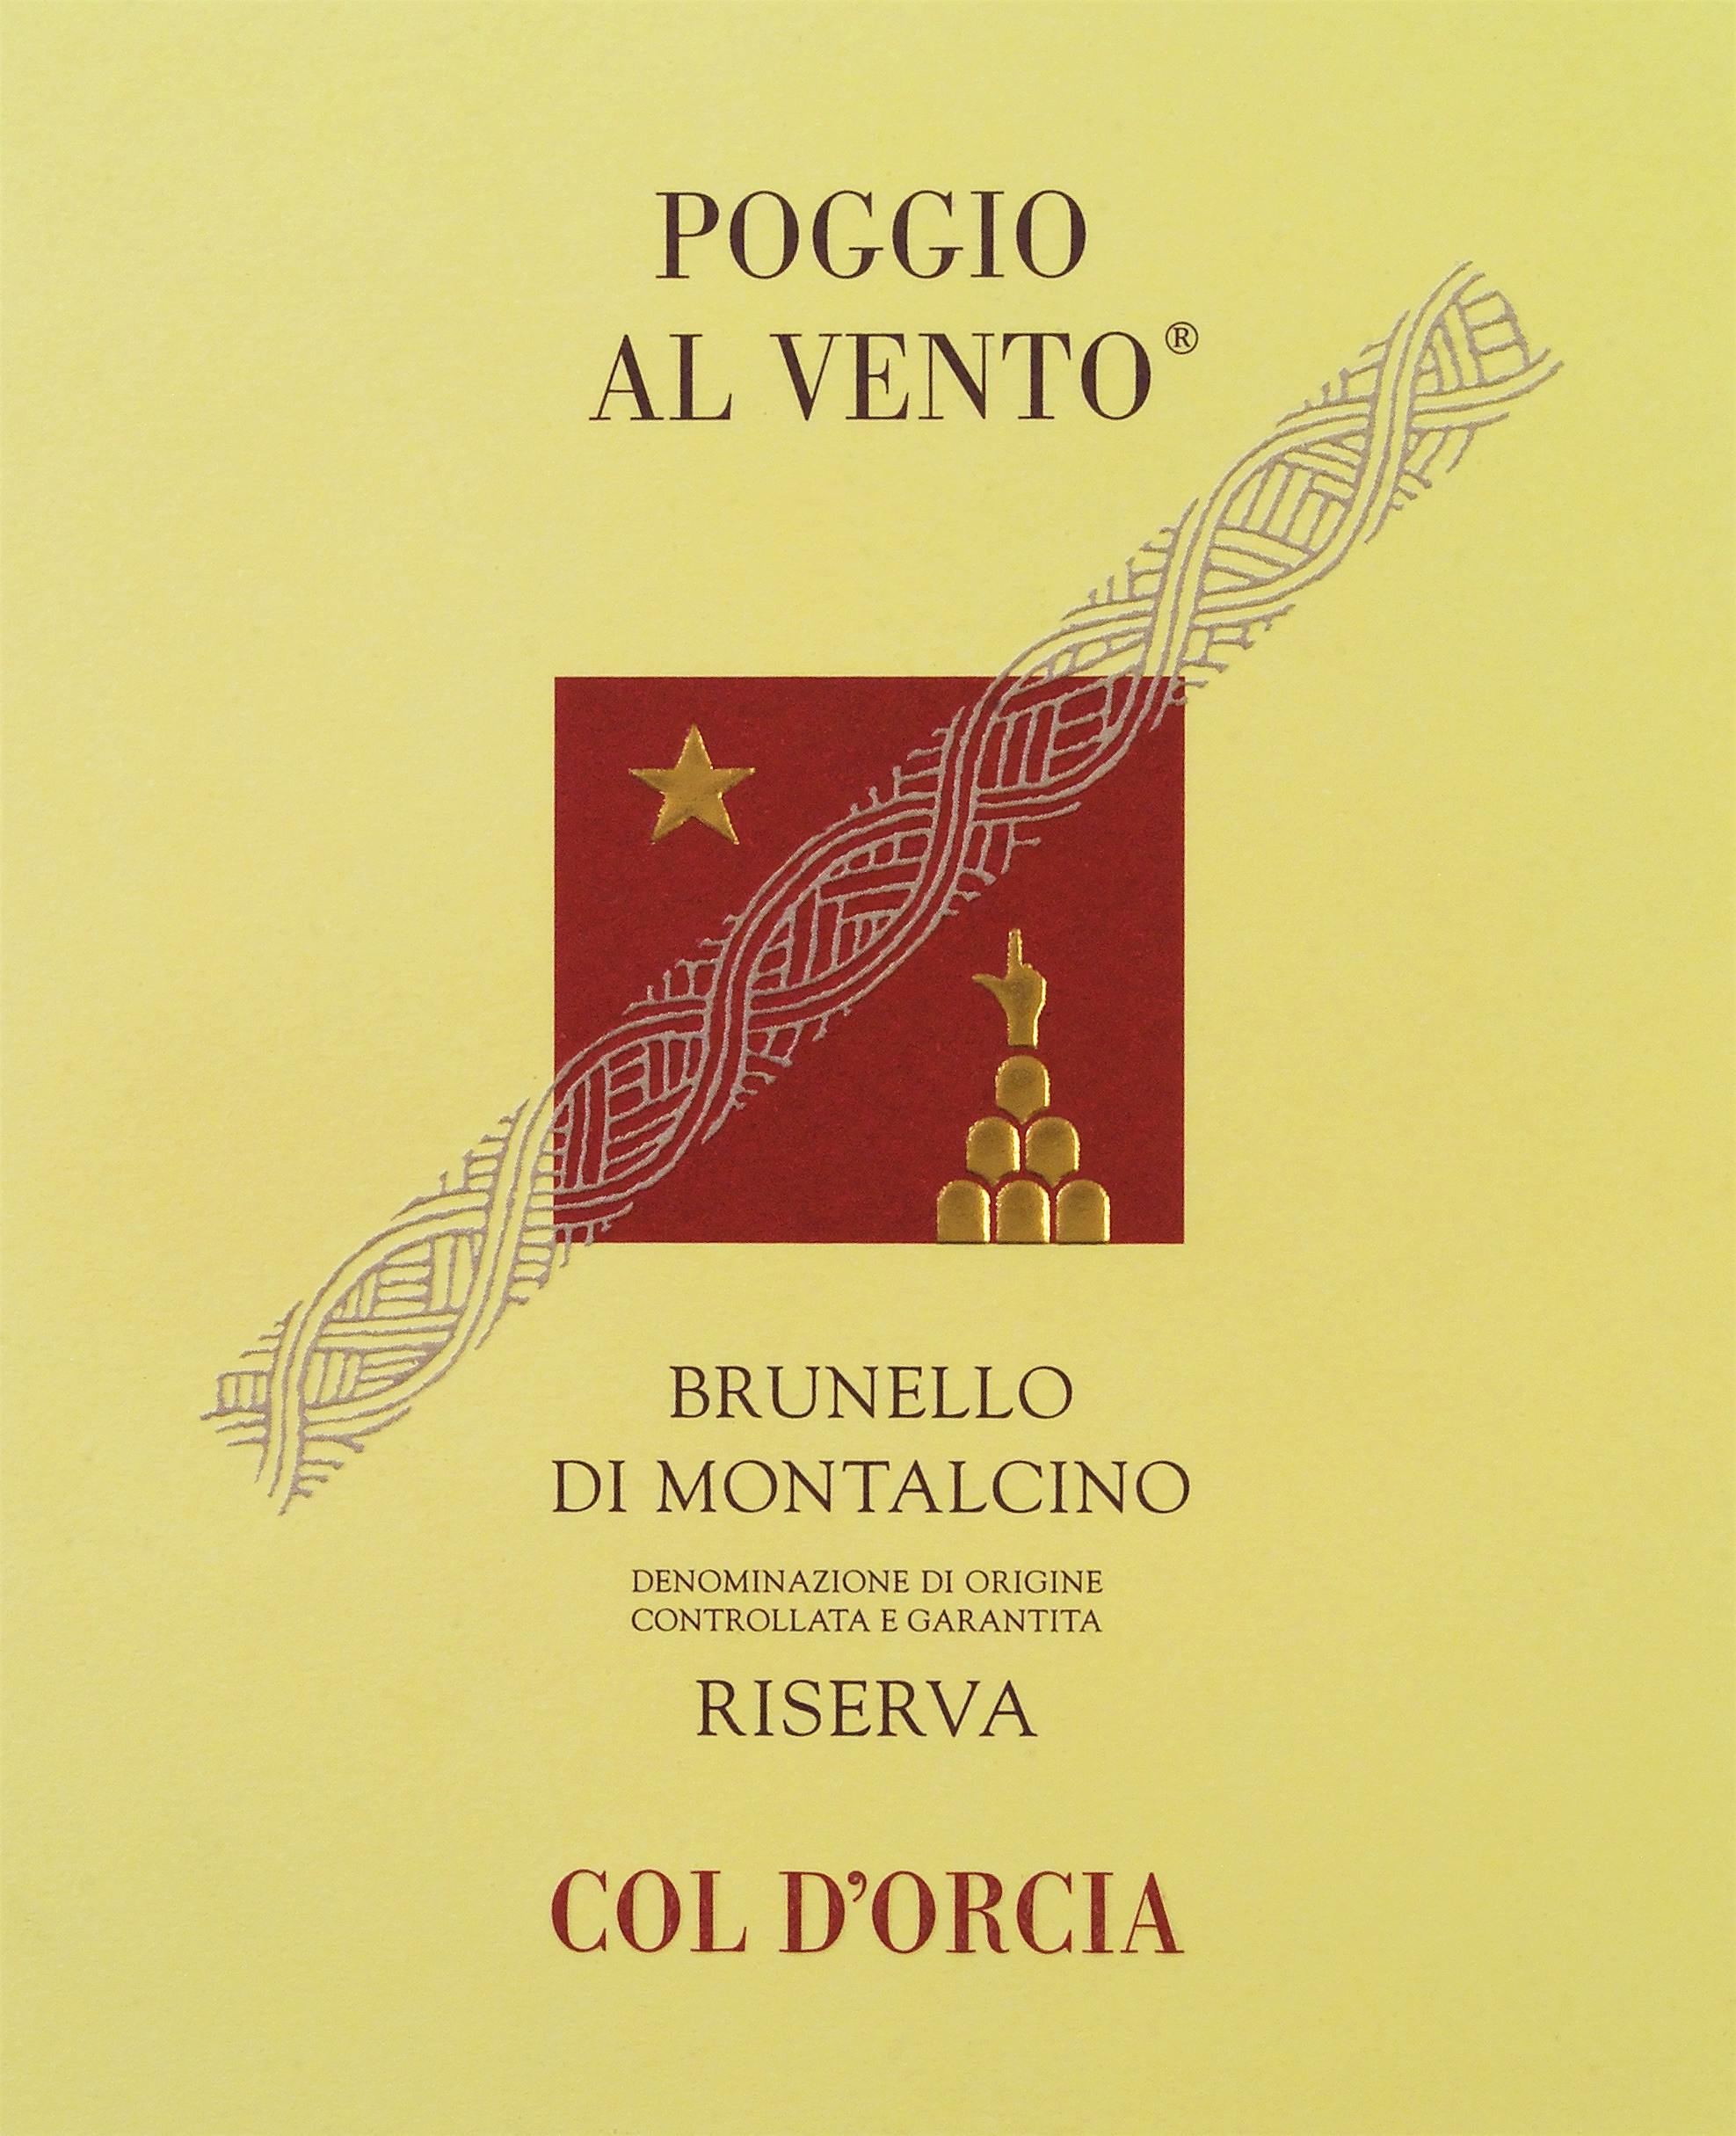 Label for Col d'Orcia